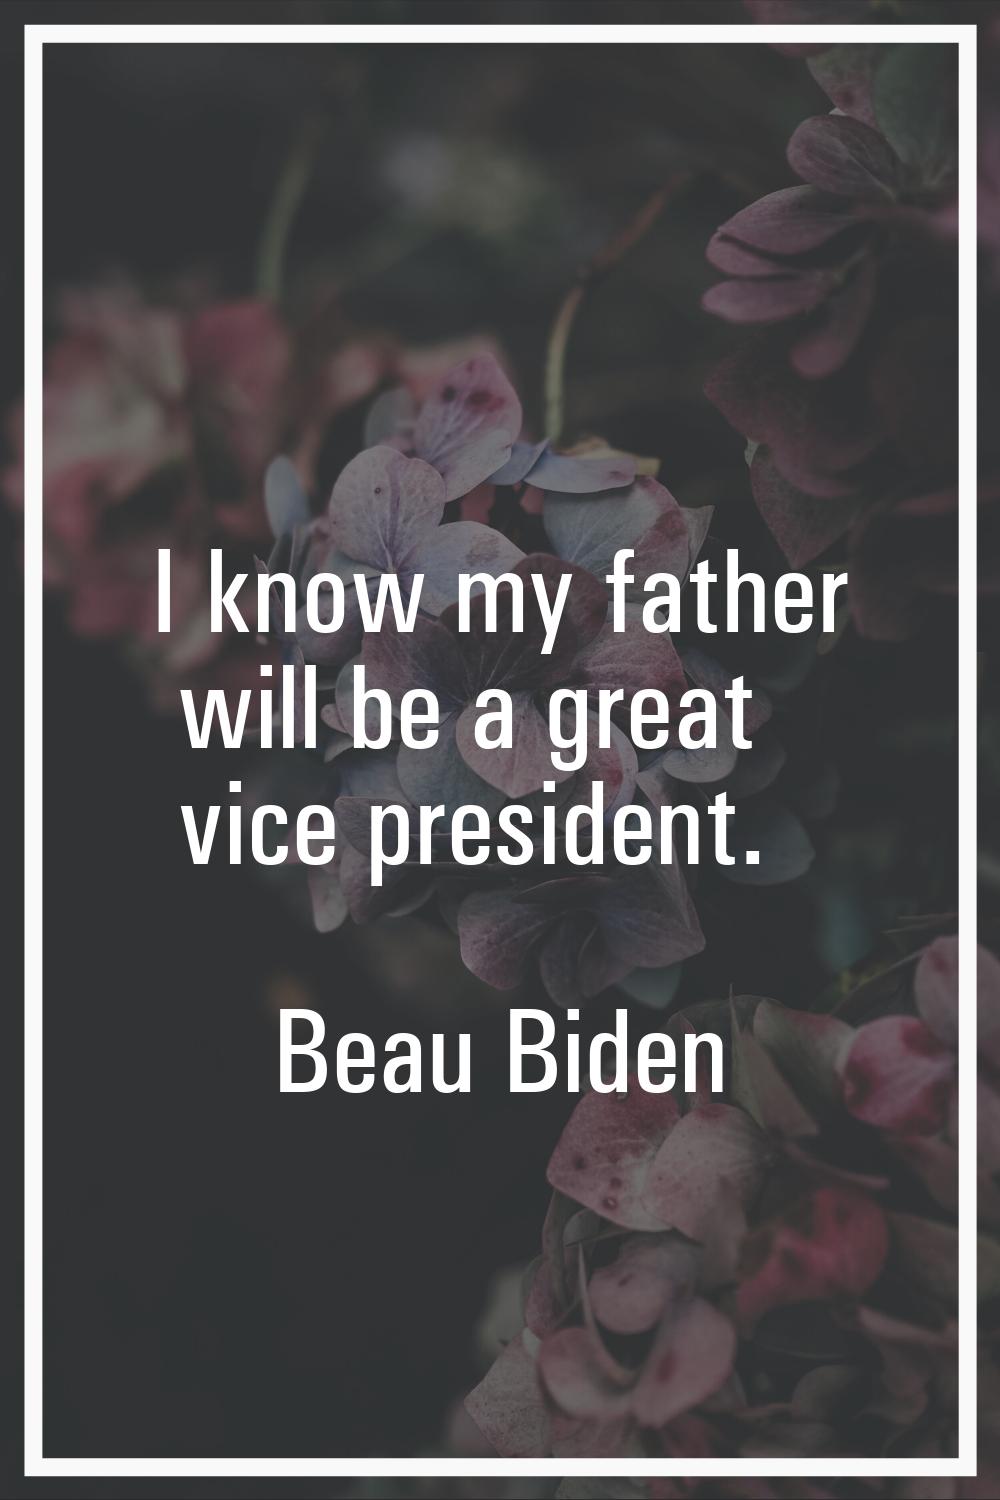 I know my father will be a great vice president.